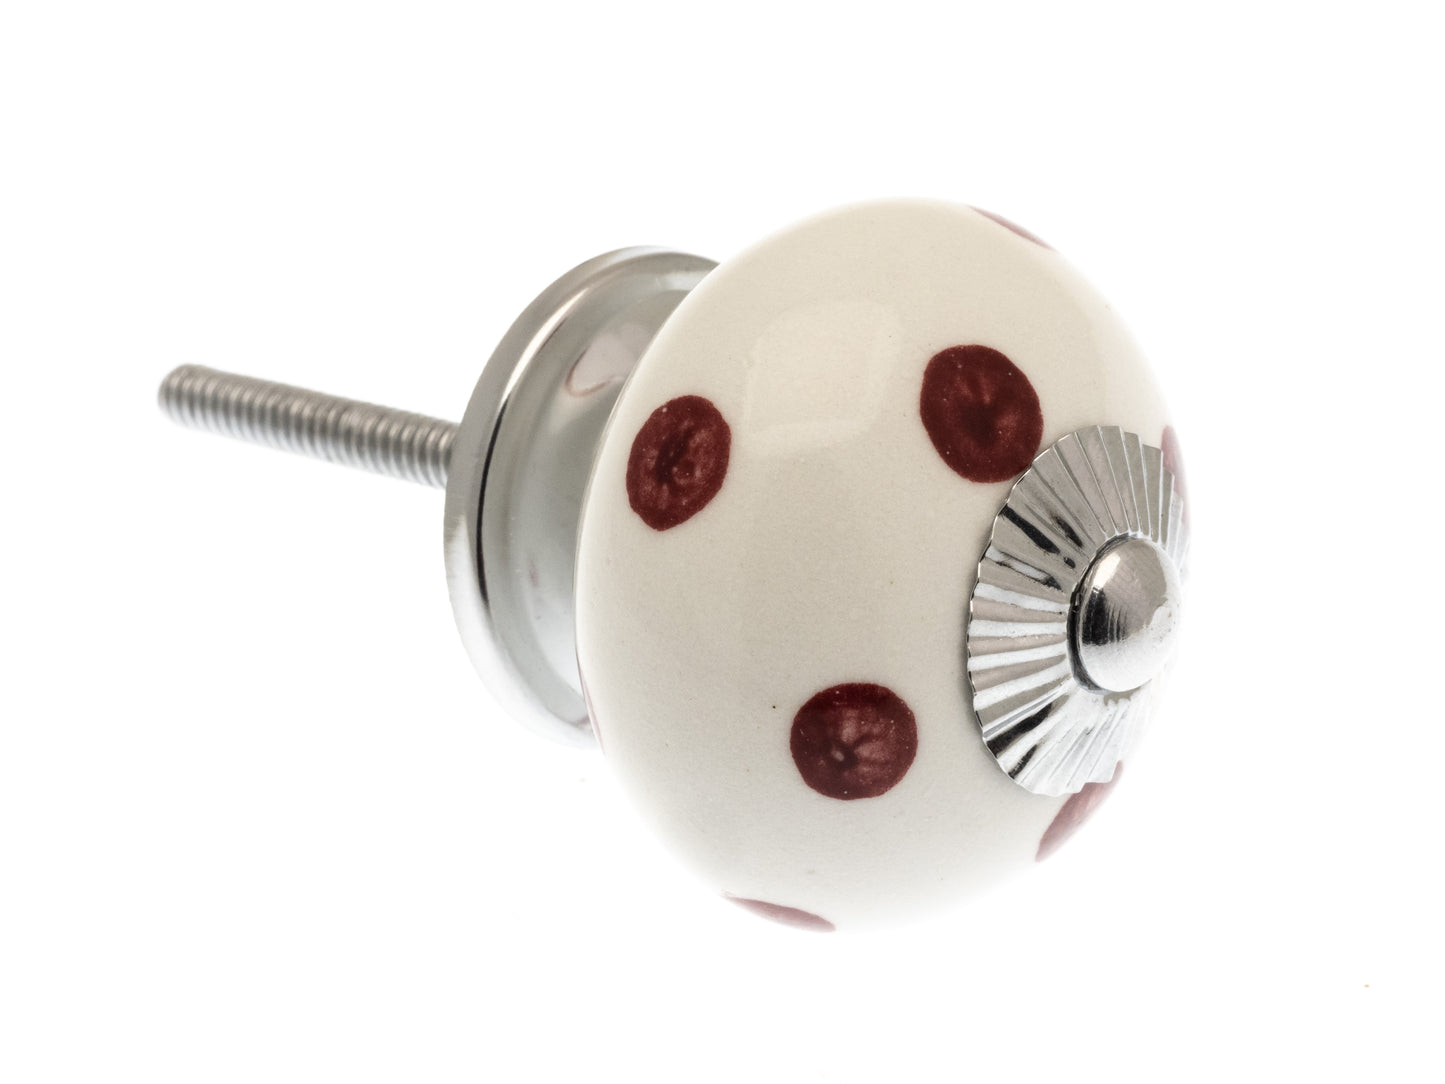 Round Ceramic Knob White with Pink Spots / Dots 40mm